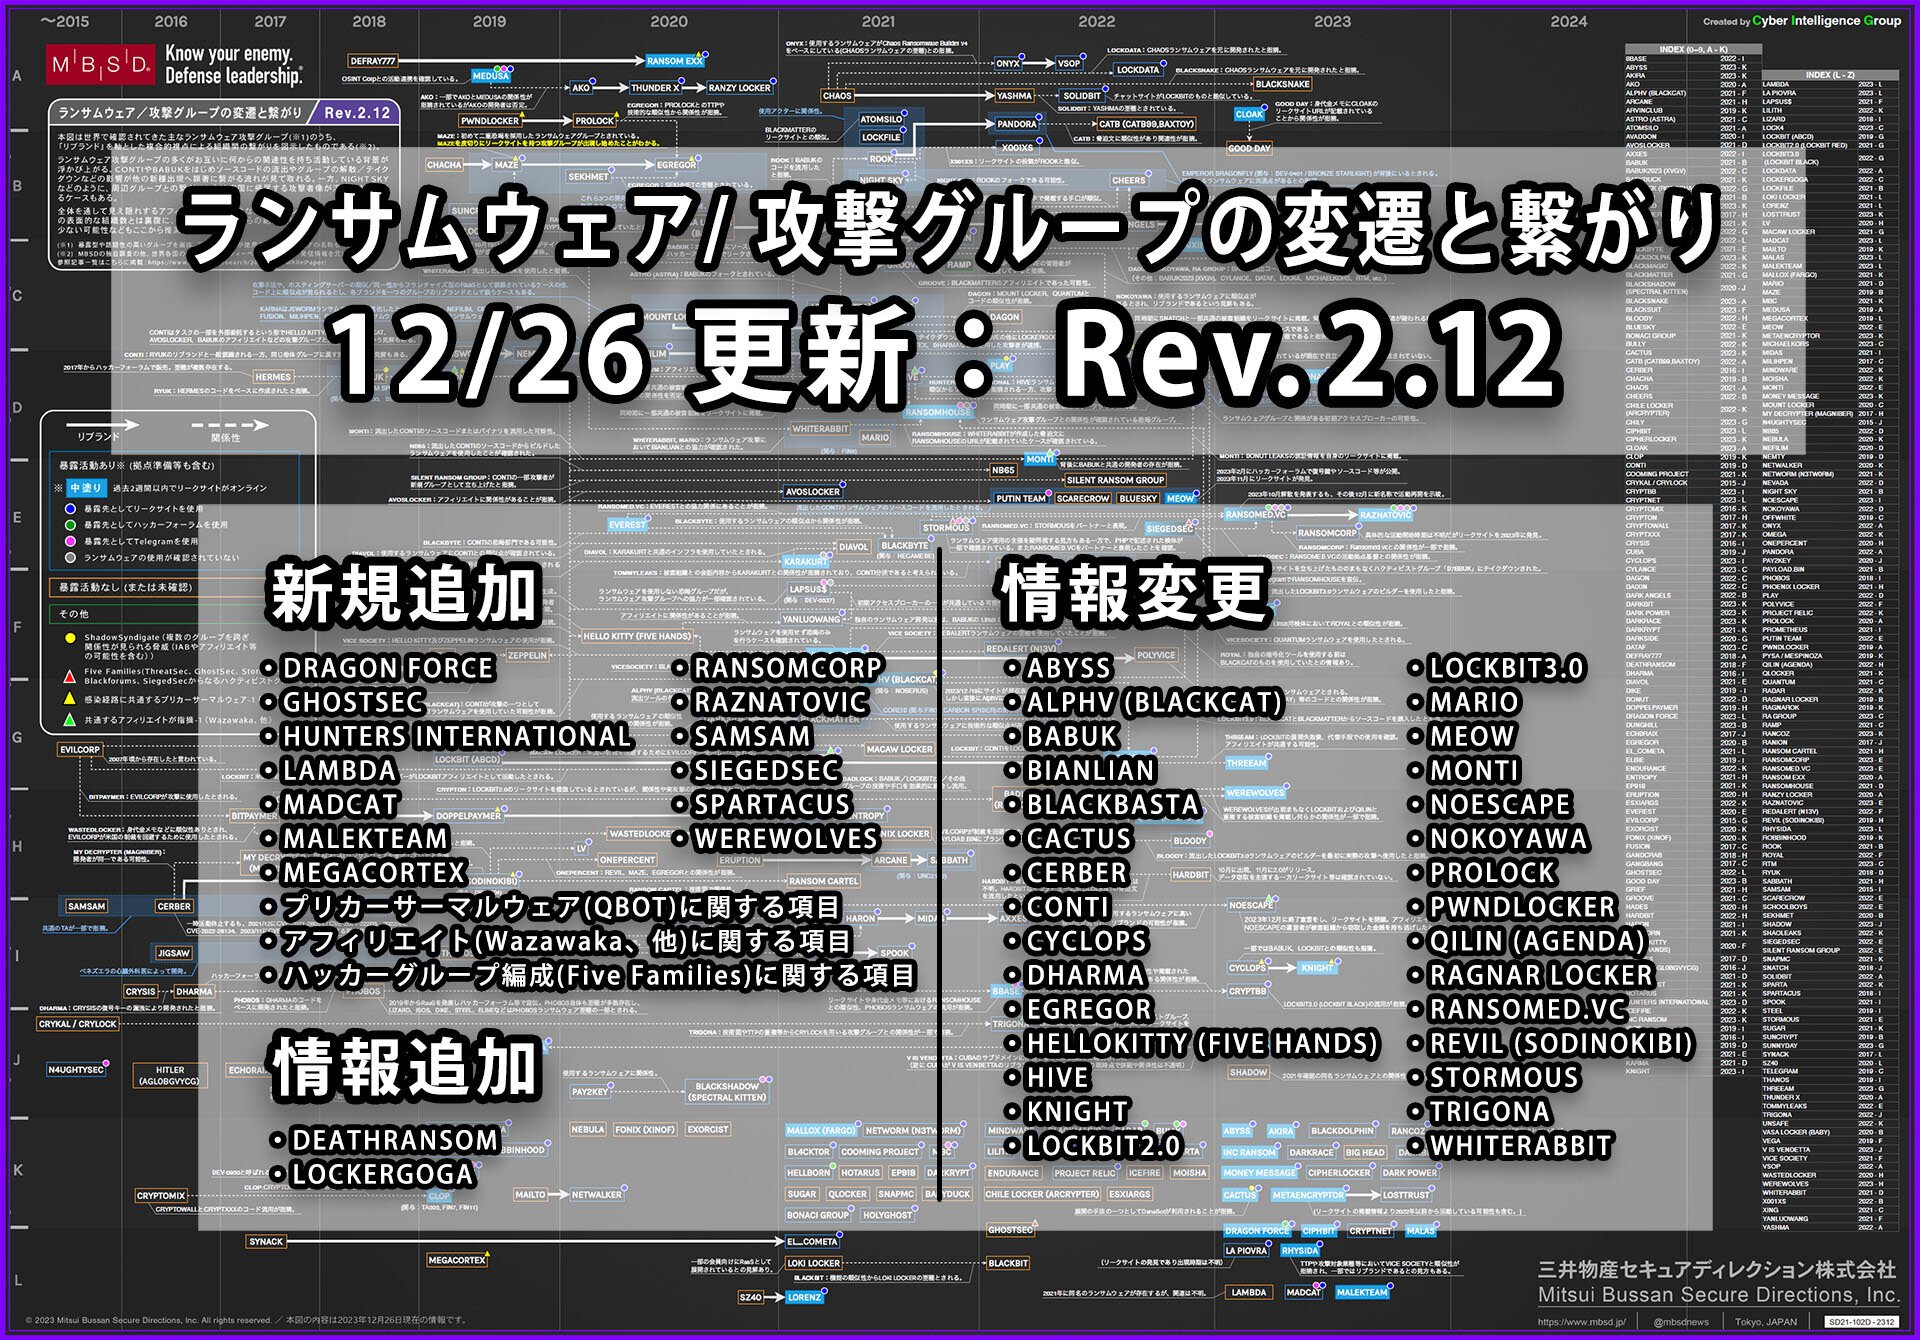 Thumb_1920_MBSD_History_of_ransomware_group_connections_and_transitions_JPN_Rev.2.12.jpg